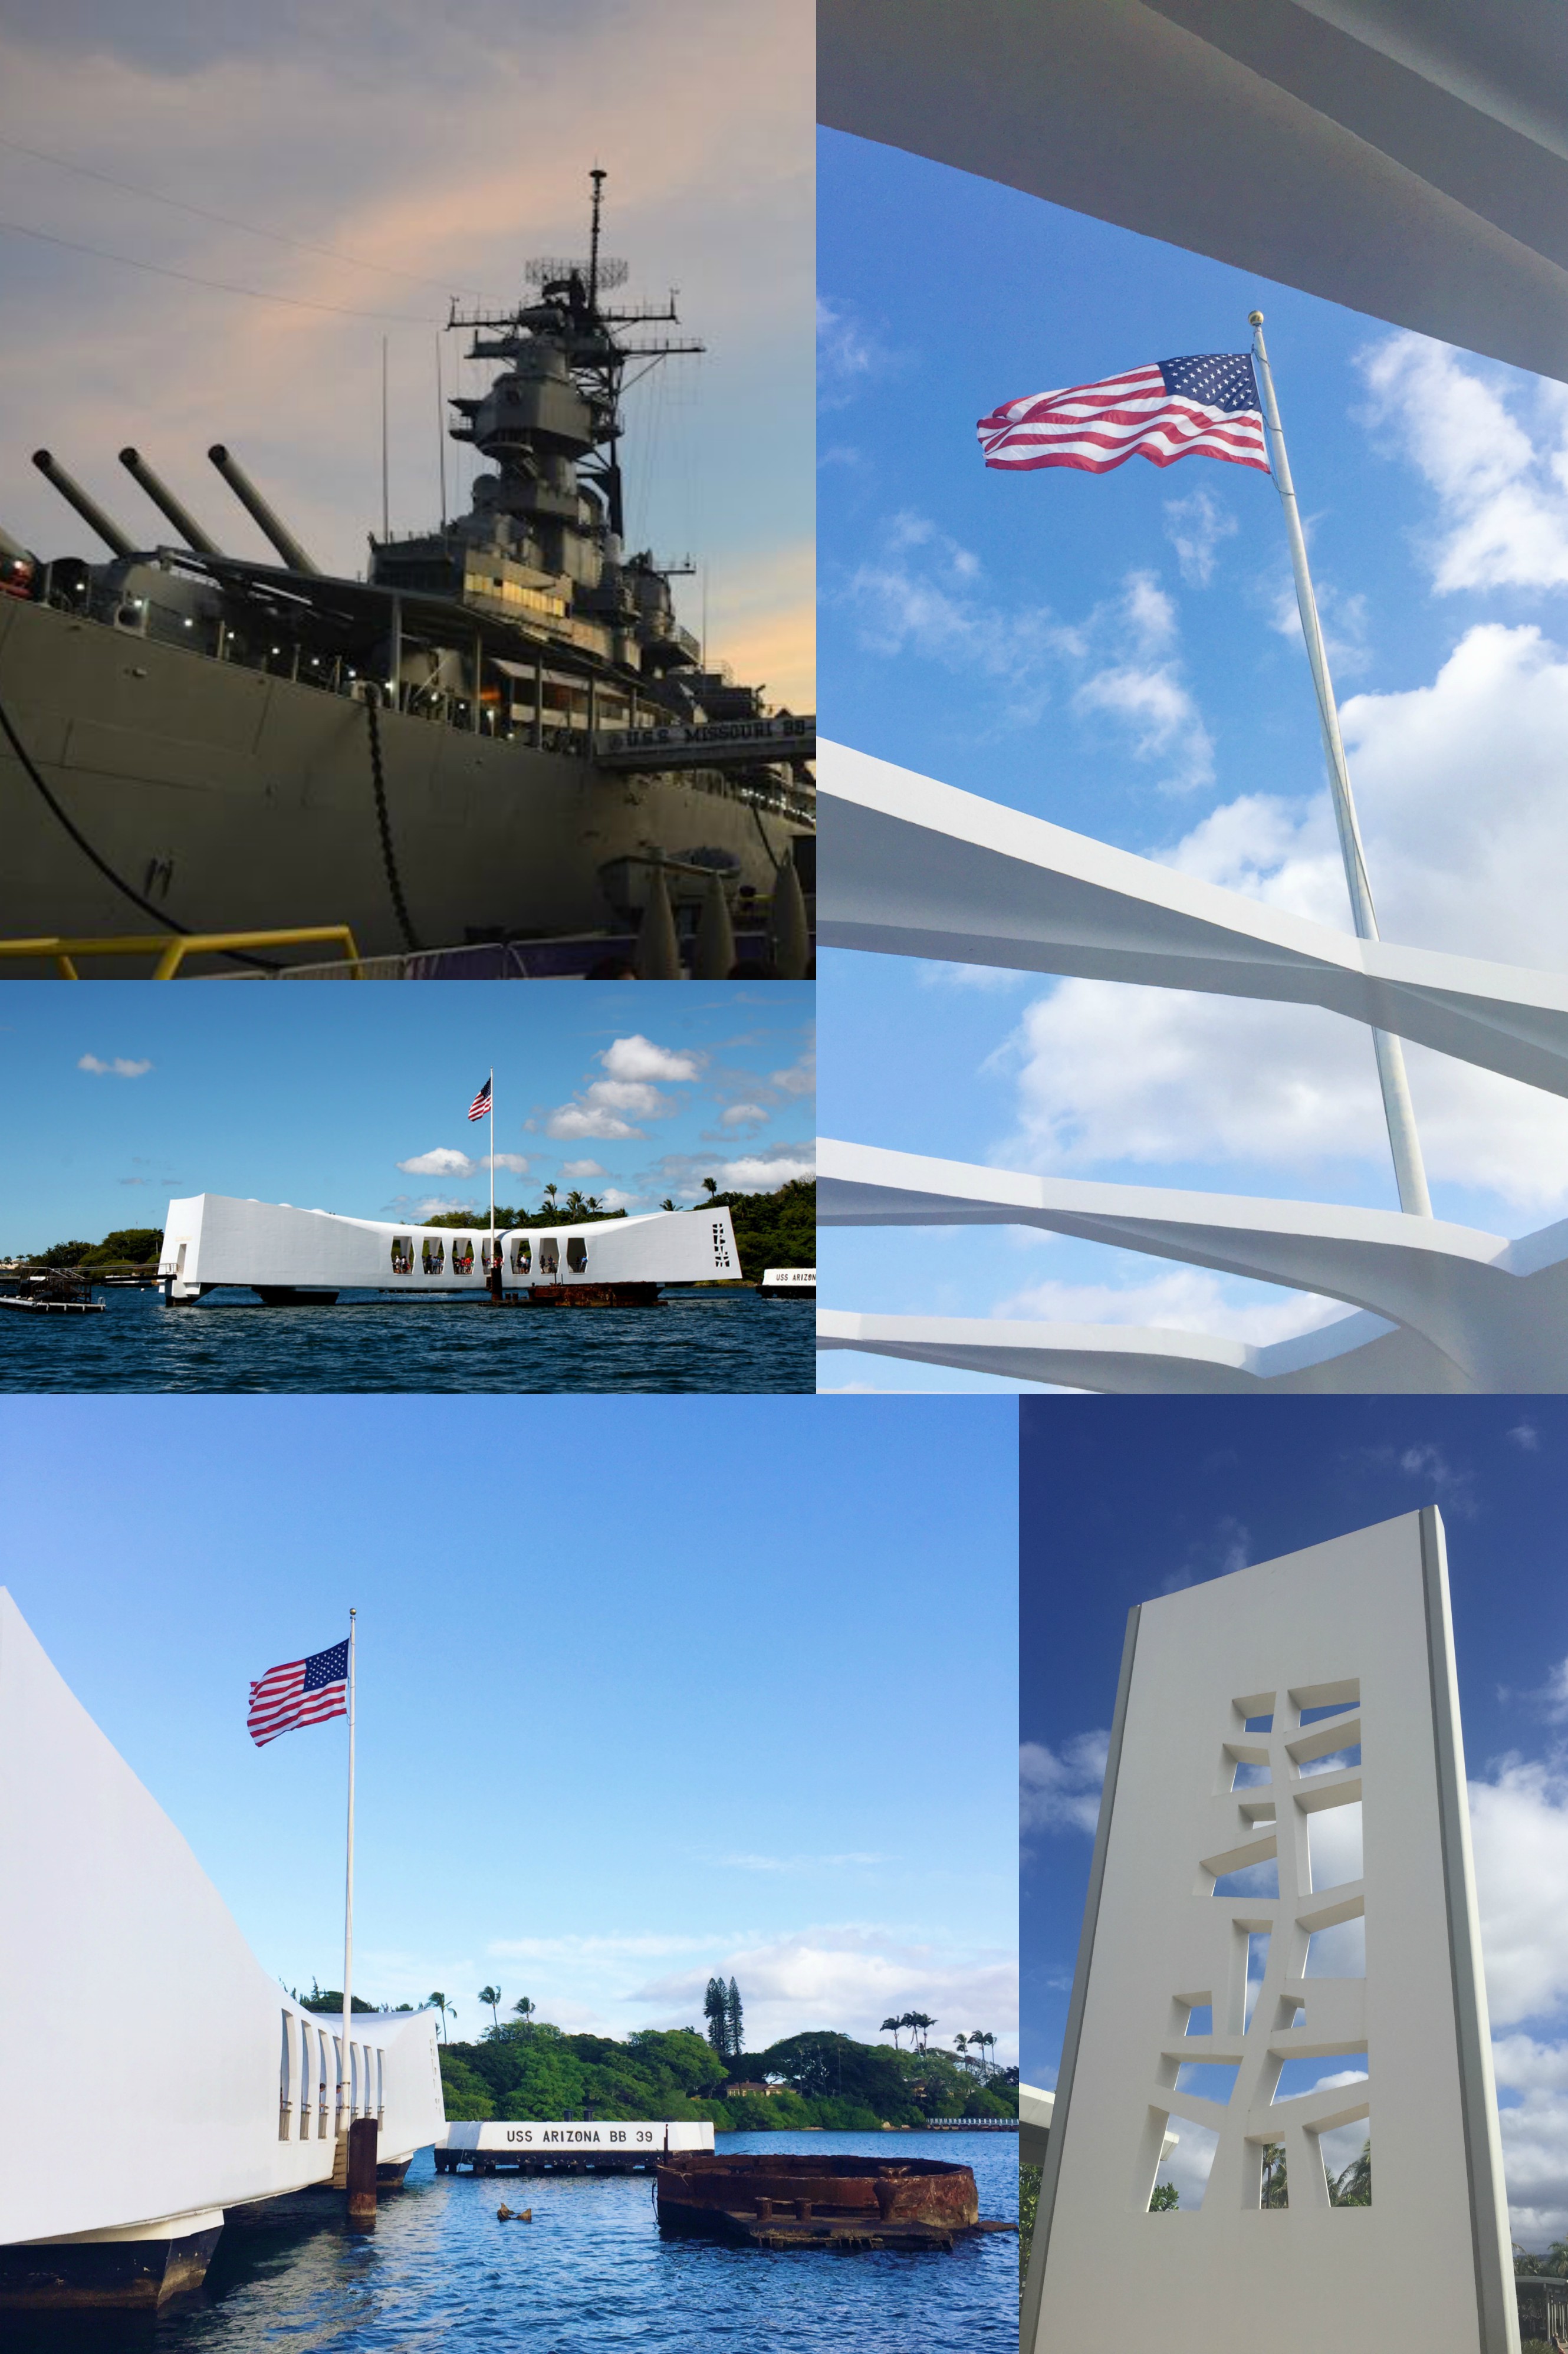 Pearl Harbor - The Instagram Guide To Honolulu - Instagram Worthy Spots Honolulu - Oahu Guide For Instagram - Best Places To Take Photos Honolulu - Oahu Vacation Guide - Where To Visit Hawaii - Hawaii Itinerary - Communikait by Kait Hanson